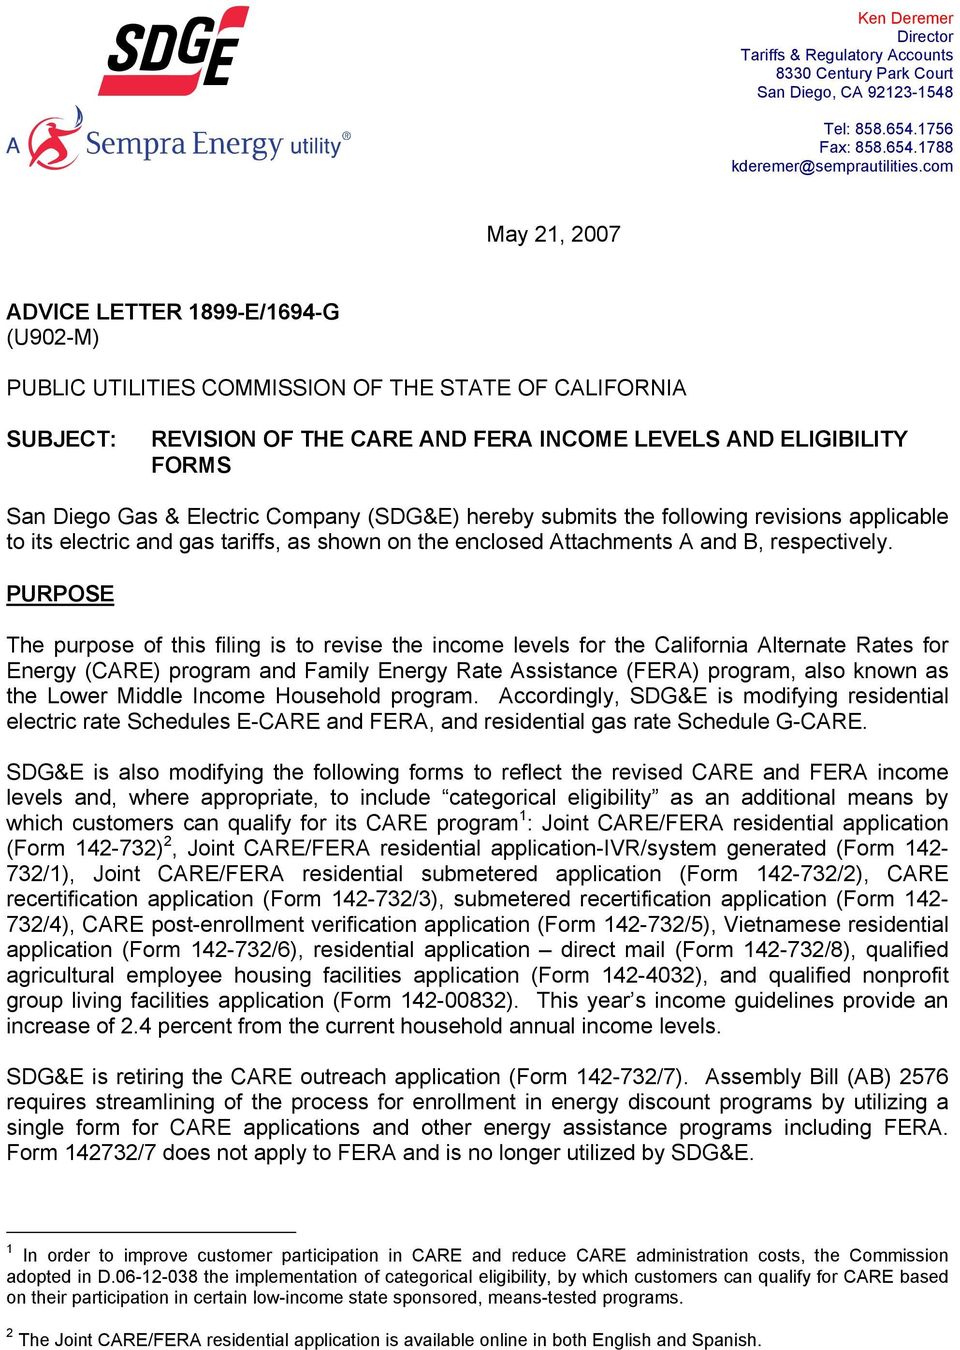 Electric Company (SDG&E) hereby submits the following revisions applicable to its electric and gas tariffs, as shown on the enclosed Attachments A and B, respectively.